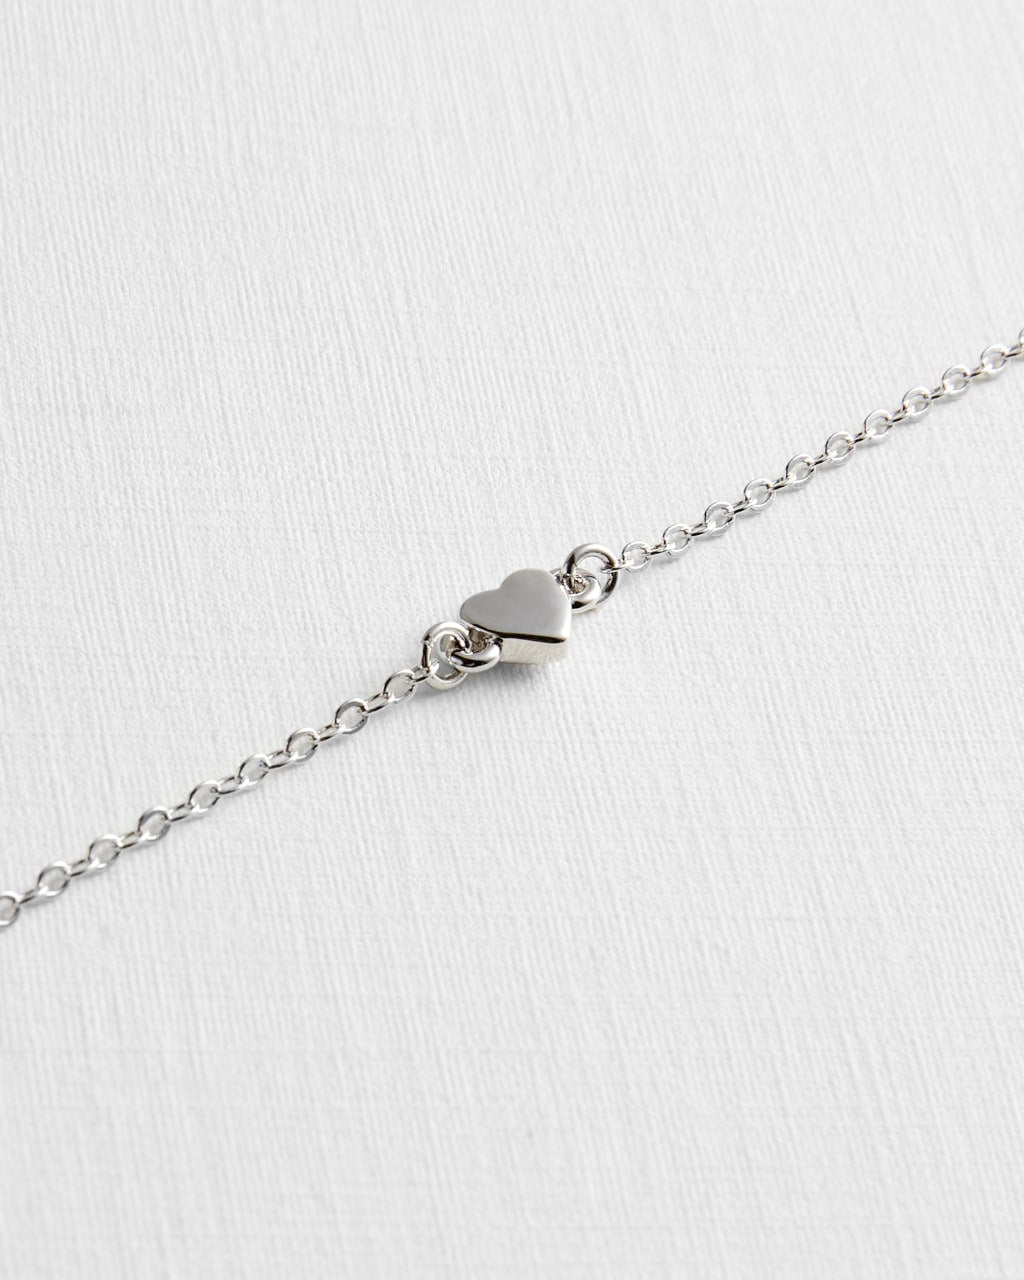 Harsaa Tiny Heart Bracelet in Silver | eightywingold - official partner of Ted Baker